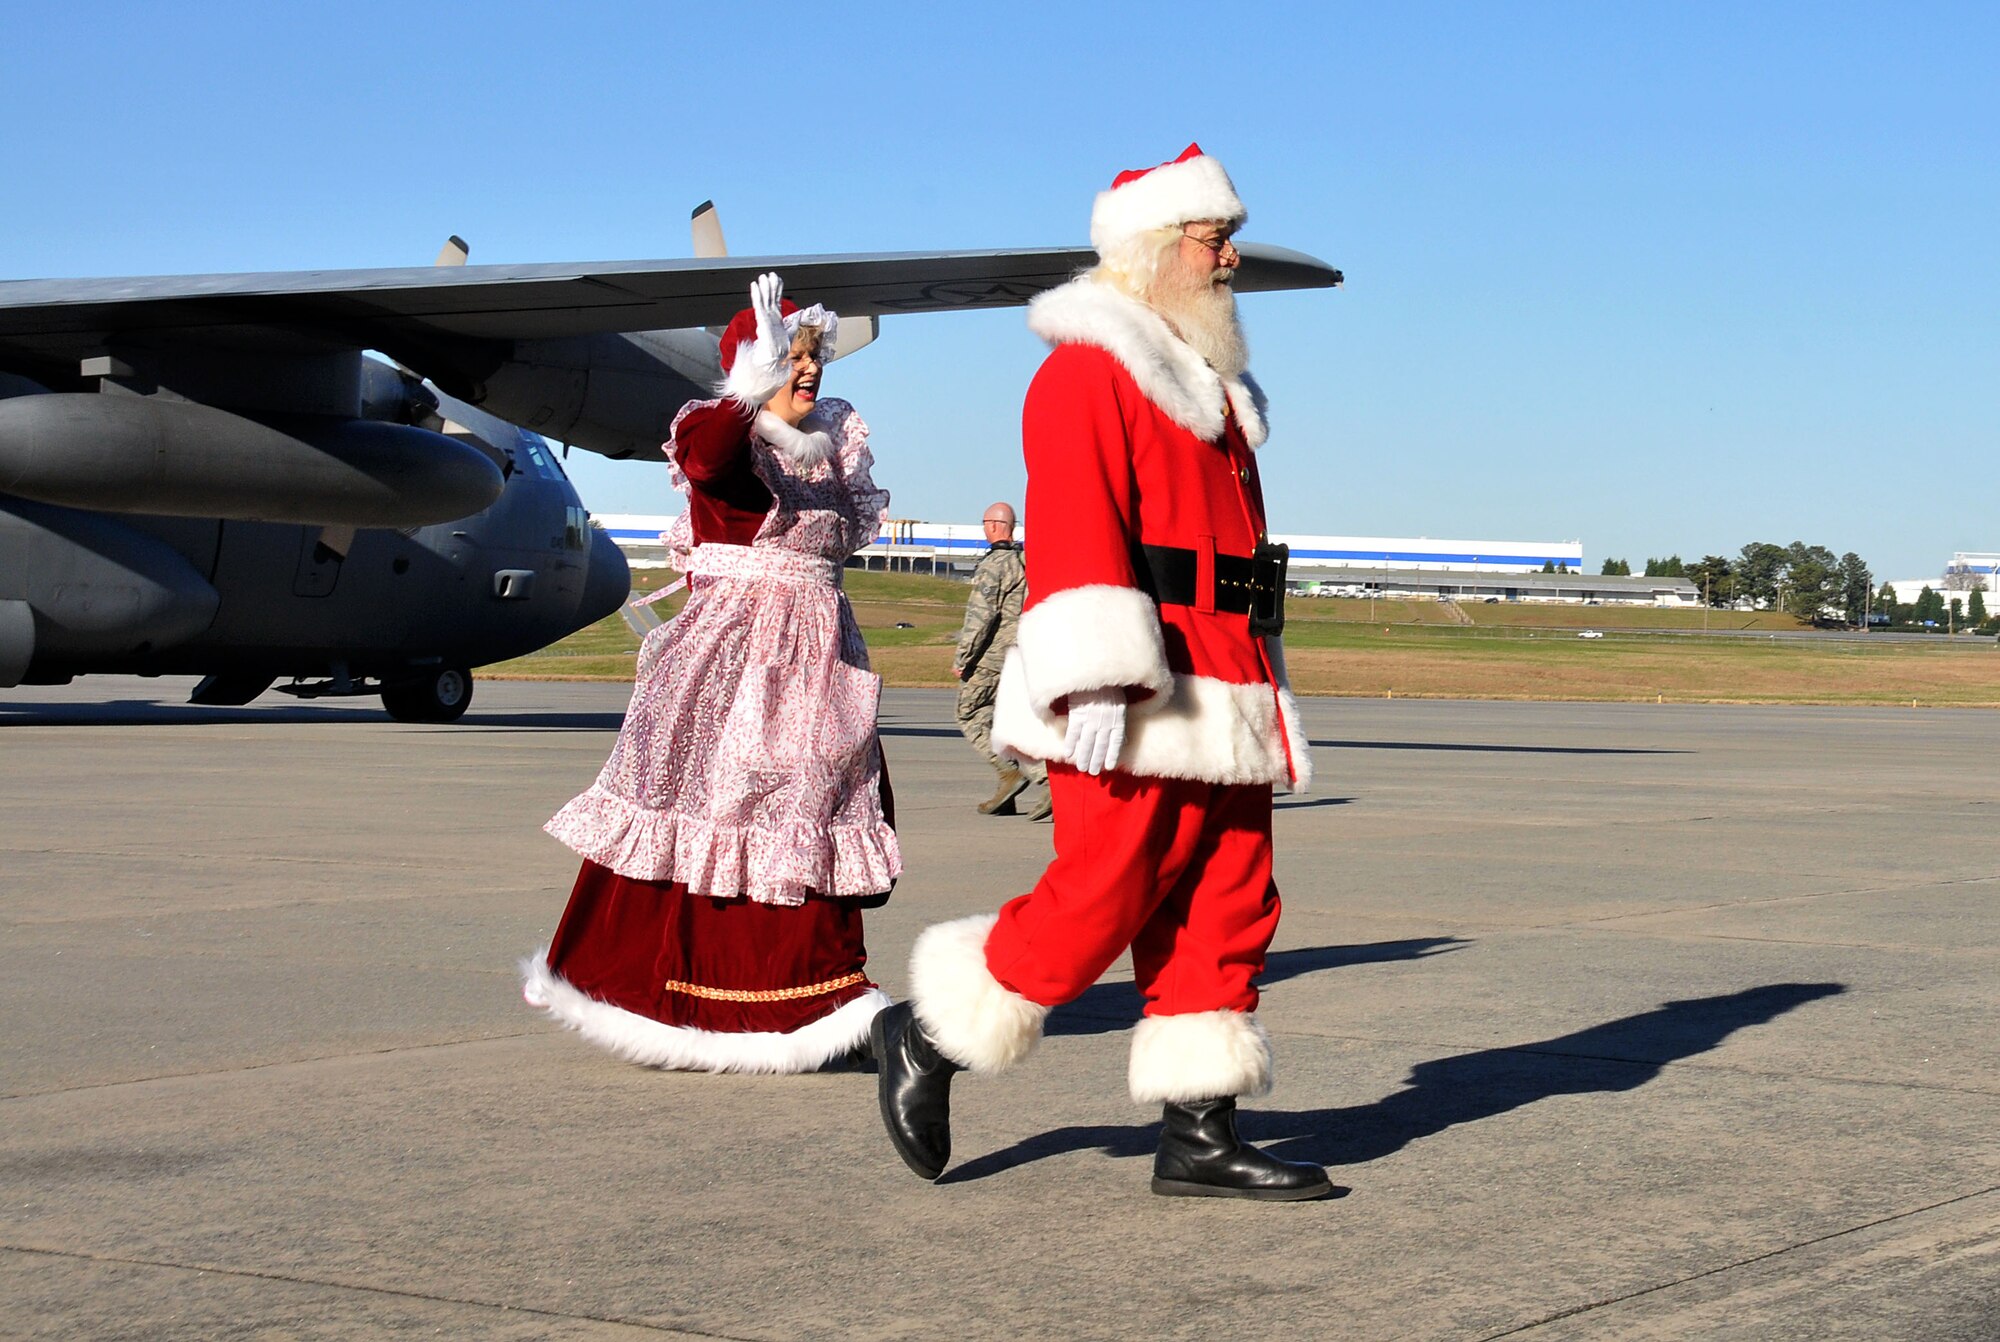 Mr. and Mrs. Santa Claus depart a C-130 Hercules and stroll toward Hangar 5 at Dobbins Air Reserve Base, Ga. on Dec. 5, 2015. The Clauses made a special trip to Dobbins to hear the Christmas wishes of families here. (U.S. Air Force photo/Senior Airman Andrew Park)